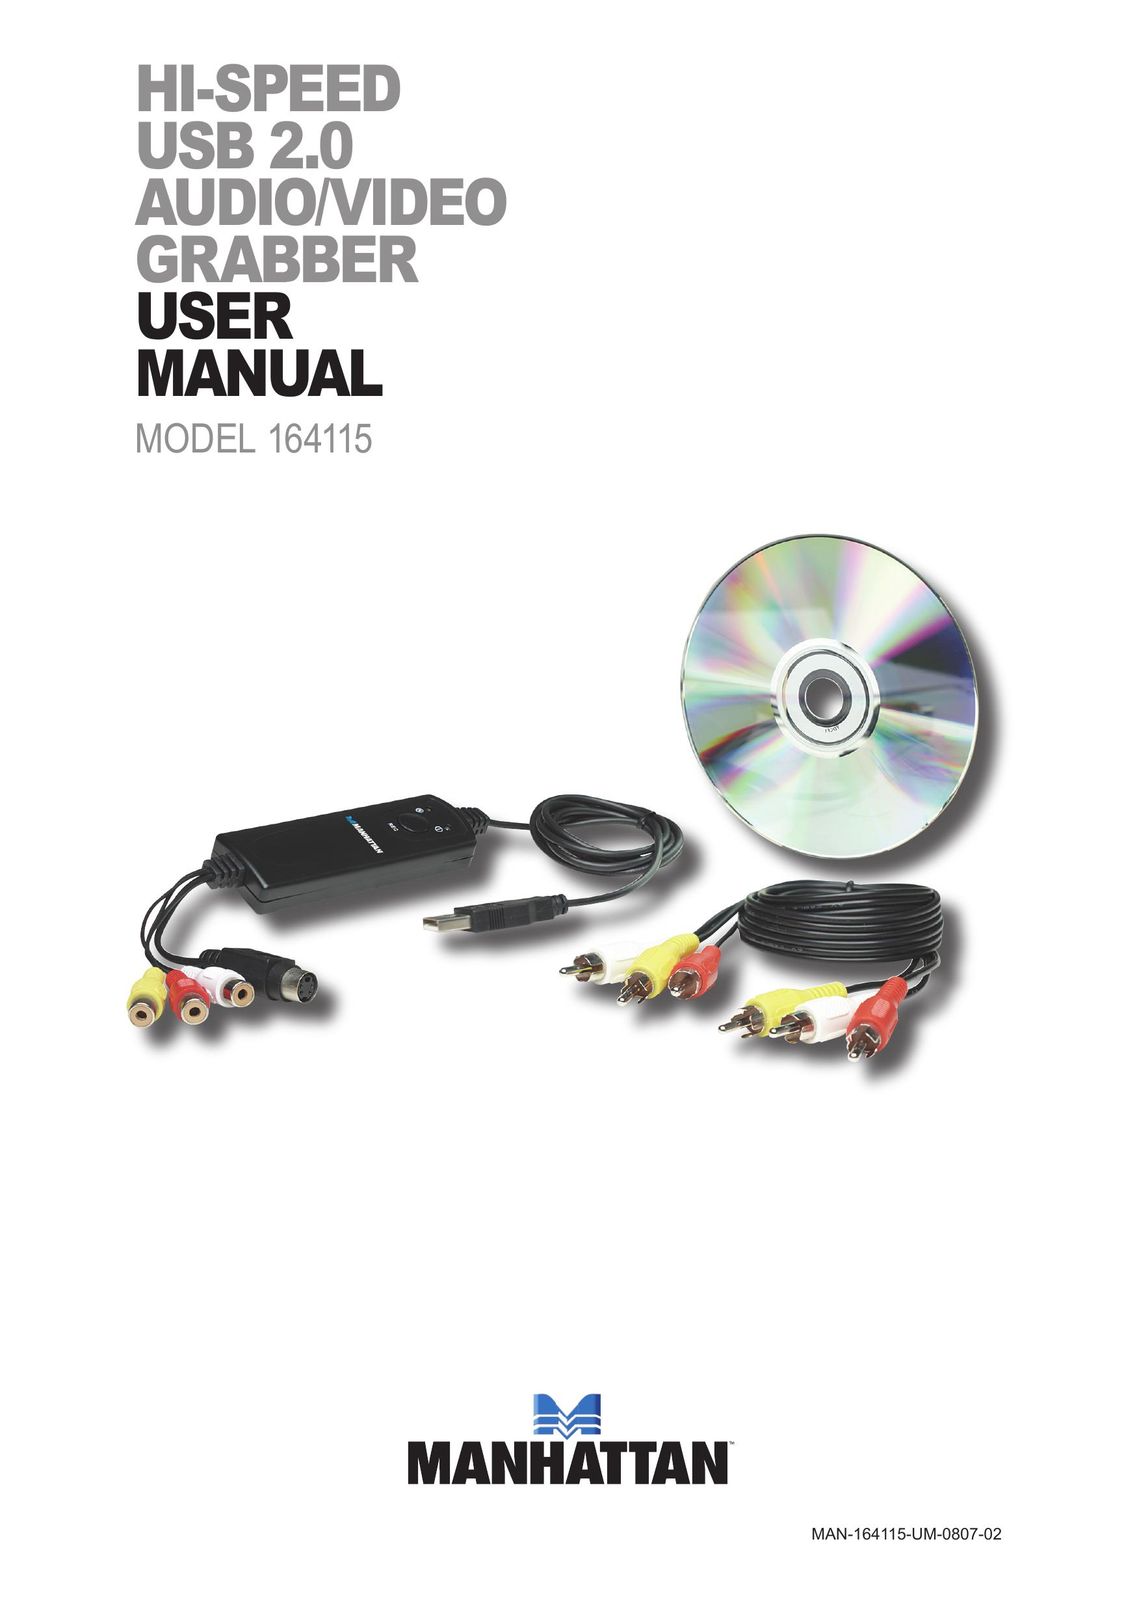 Manhattan Computer Products 164115 Computer Drive User Manual